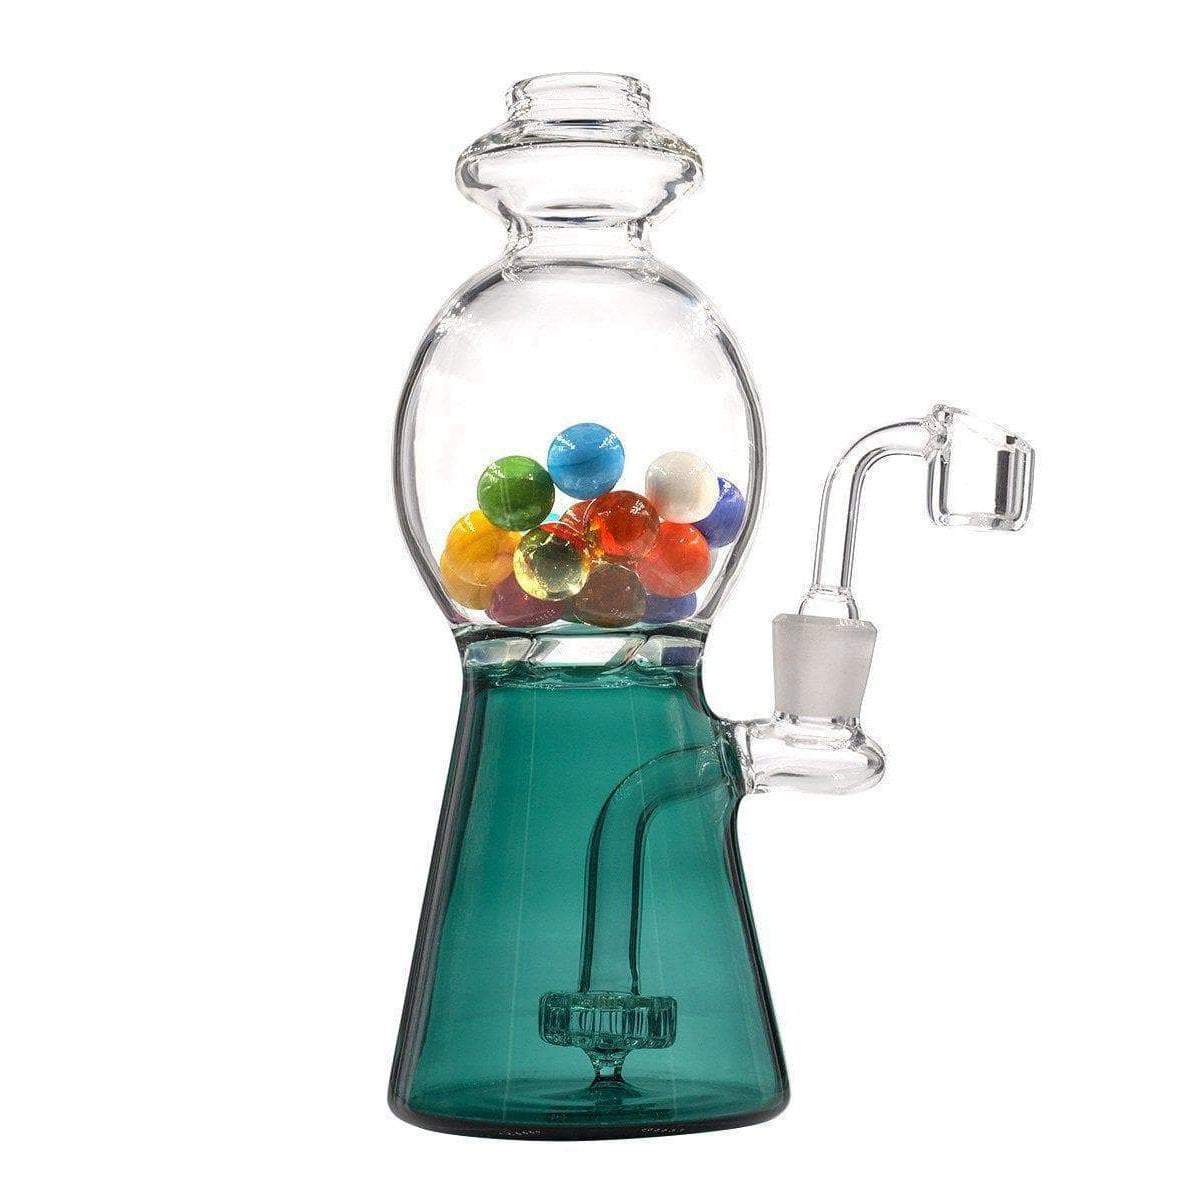 Glass Rig that looks like a gumball machine with glass gumballs in it